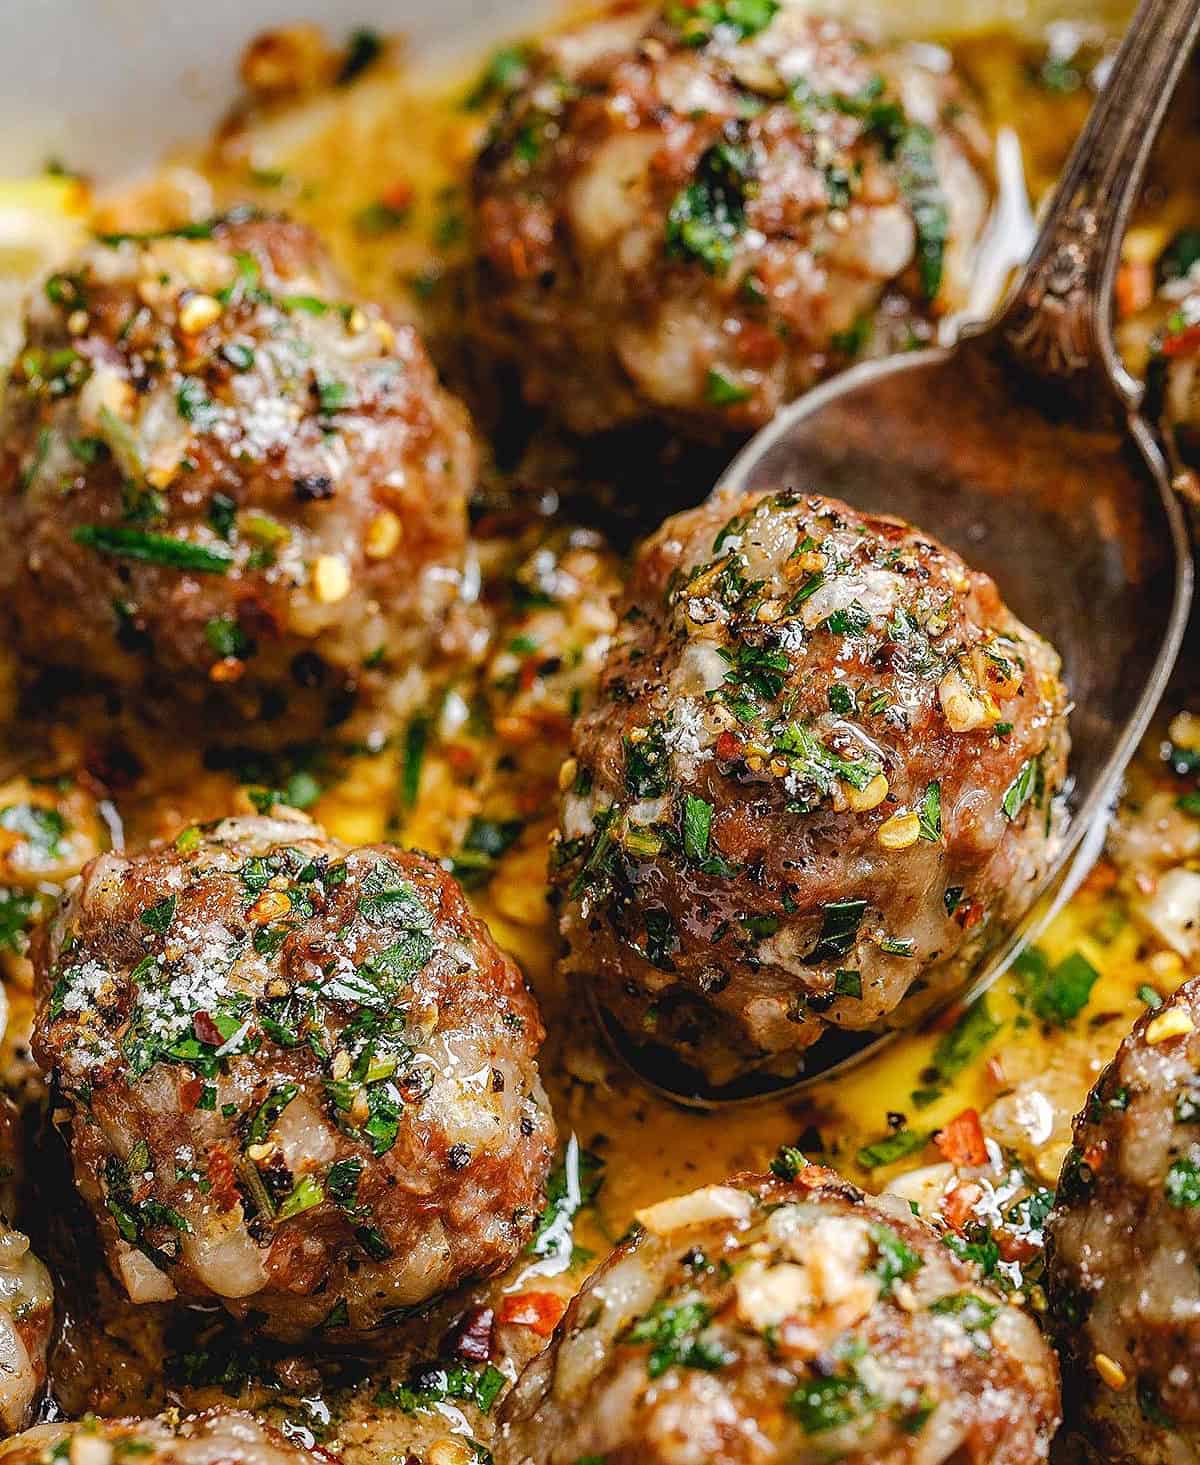  These juicy turkey meatballs are sure to steal the spotlight at your next party!